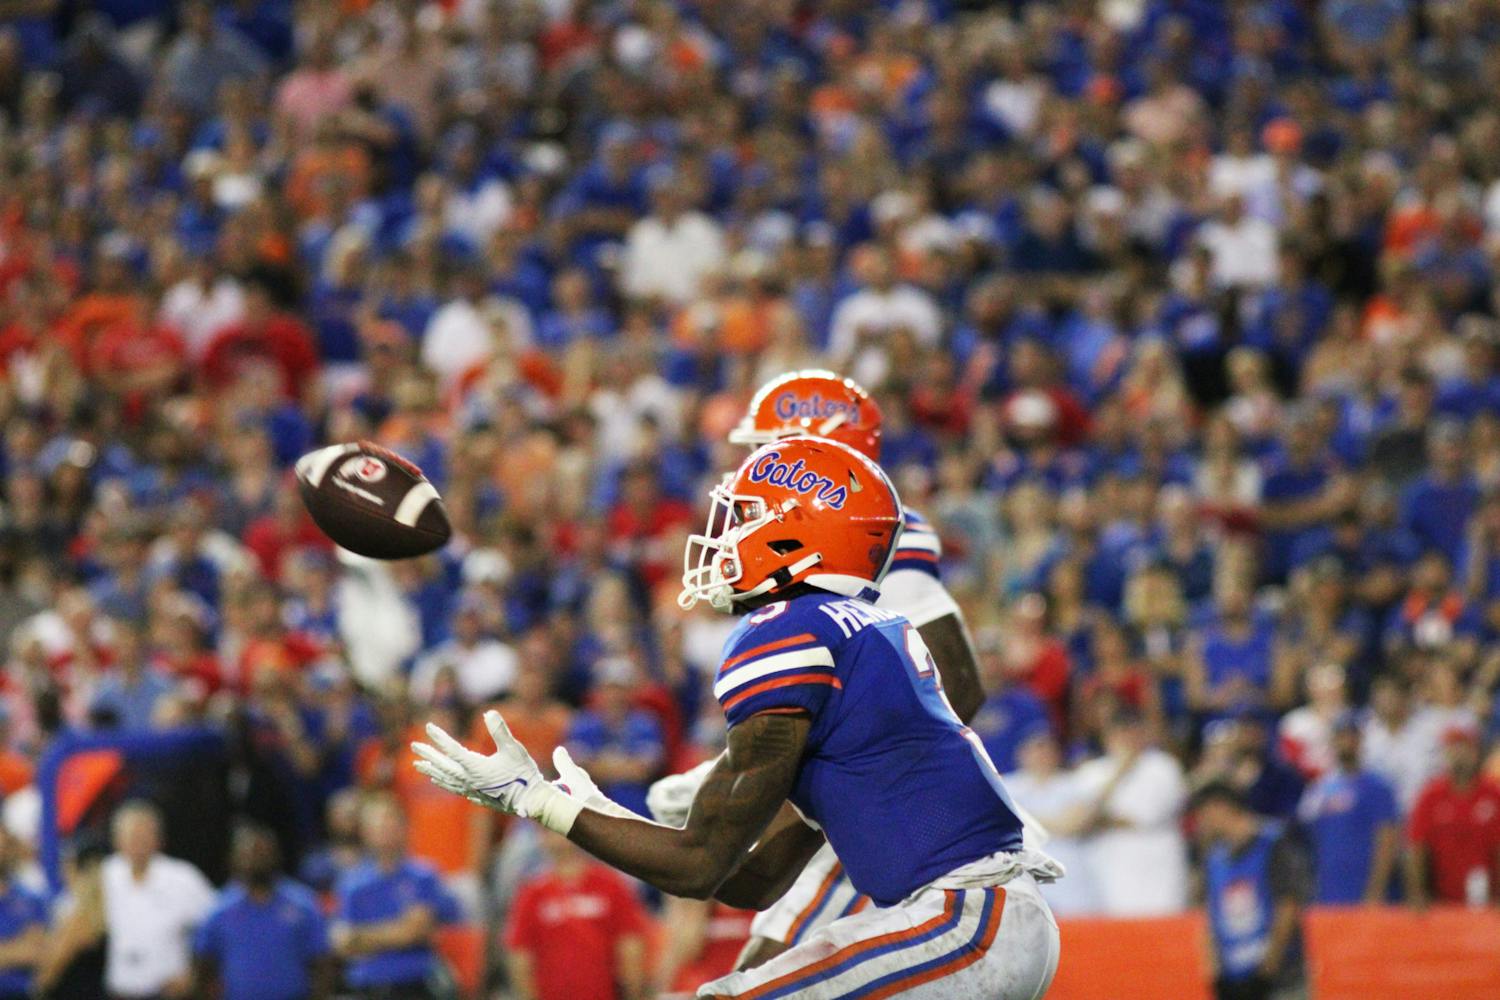 The Florida Gators held off the No. 7 Utah Utes 29-26 in the first game of the season Saturday. The team was backed by 90,799 fans in Ben Hill Griffin Stadium — the most ever for a UF season opener, 10th most in program history and 2,251 more than the listed capacity.